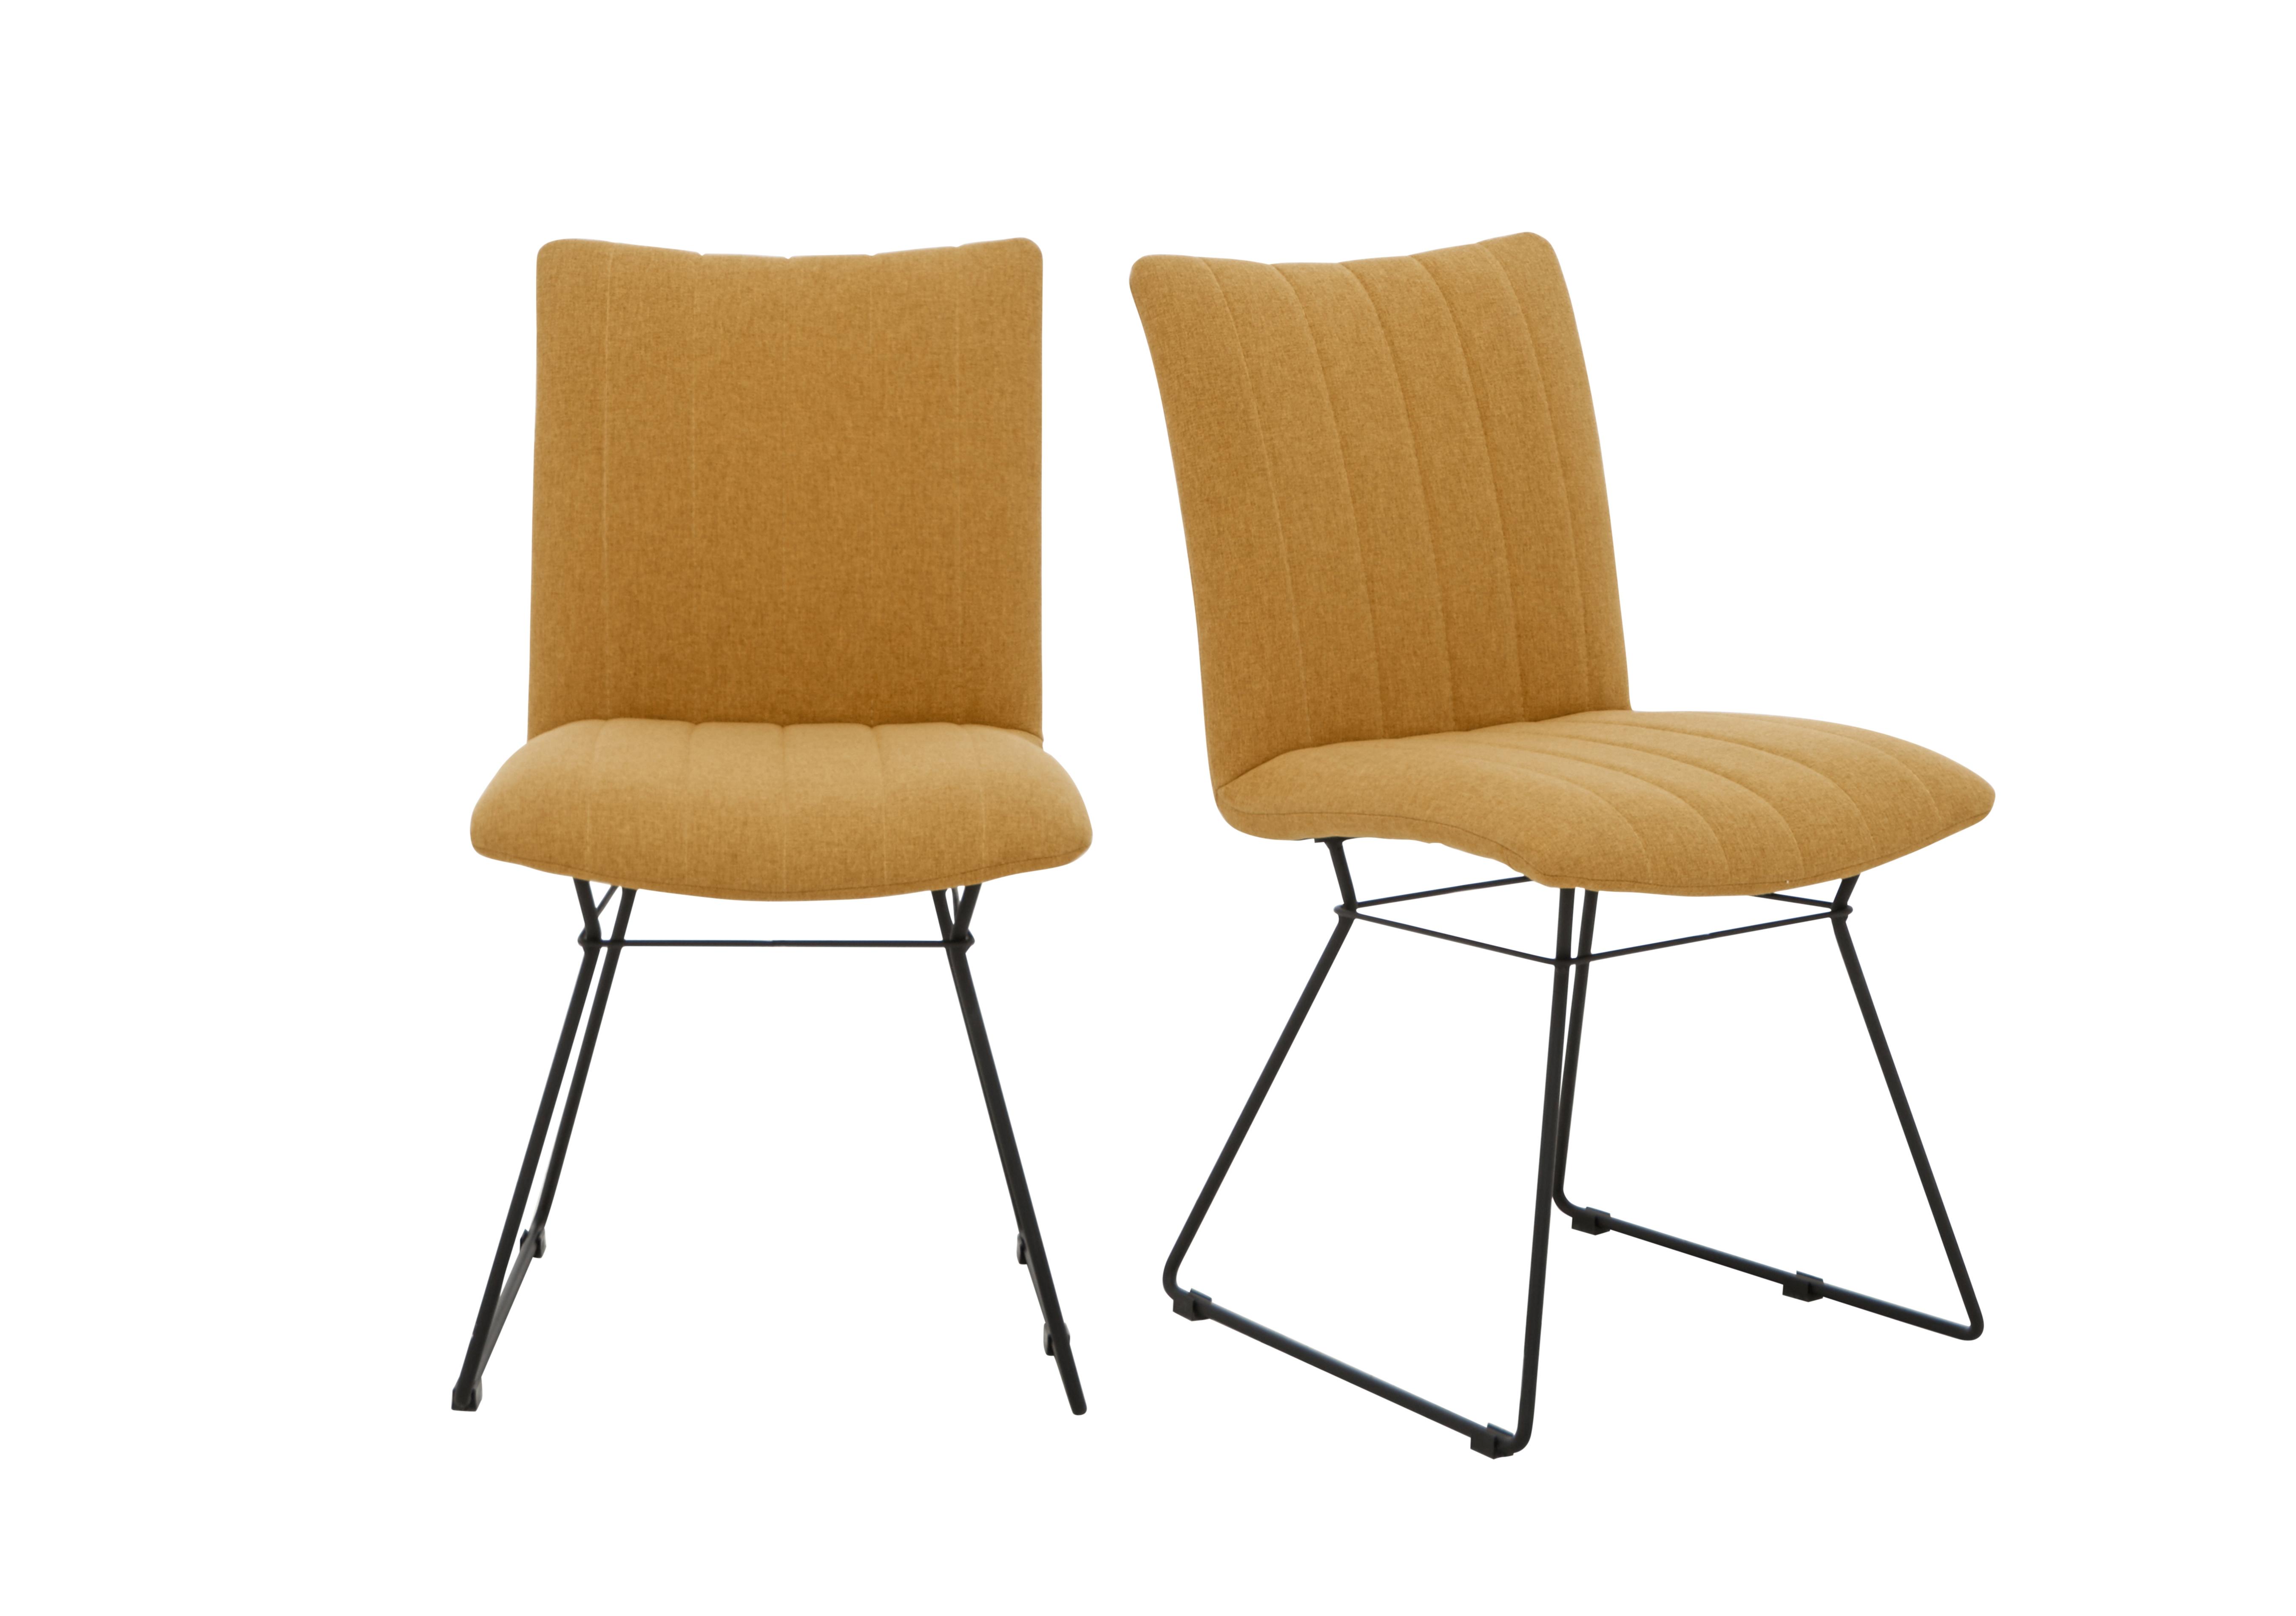 Ace Pair of Dining Chairs in Yellow on Furniture Village